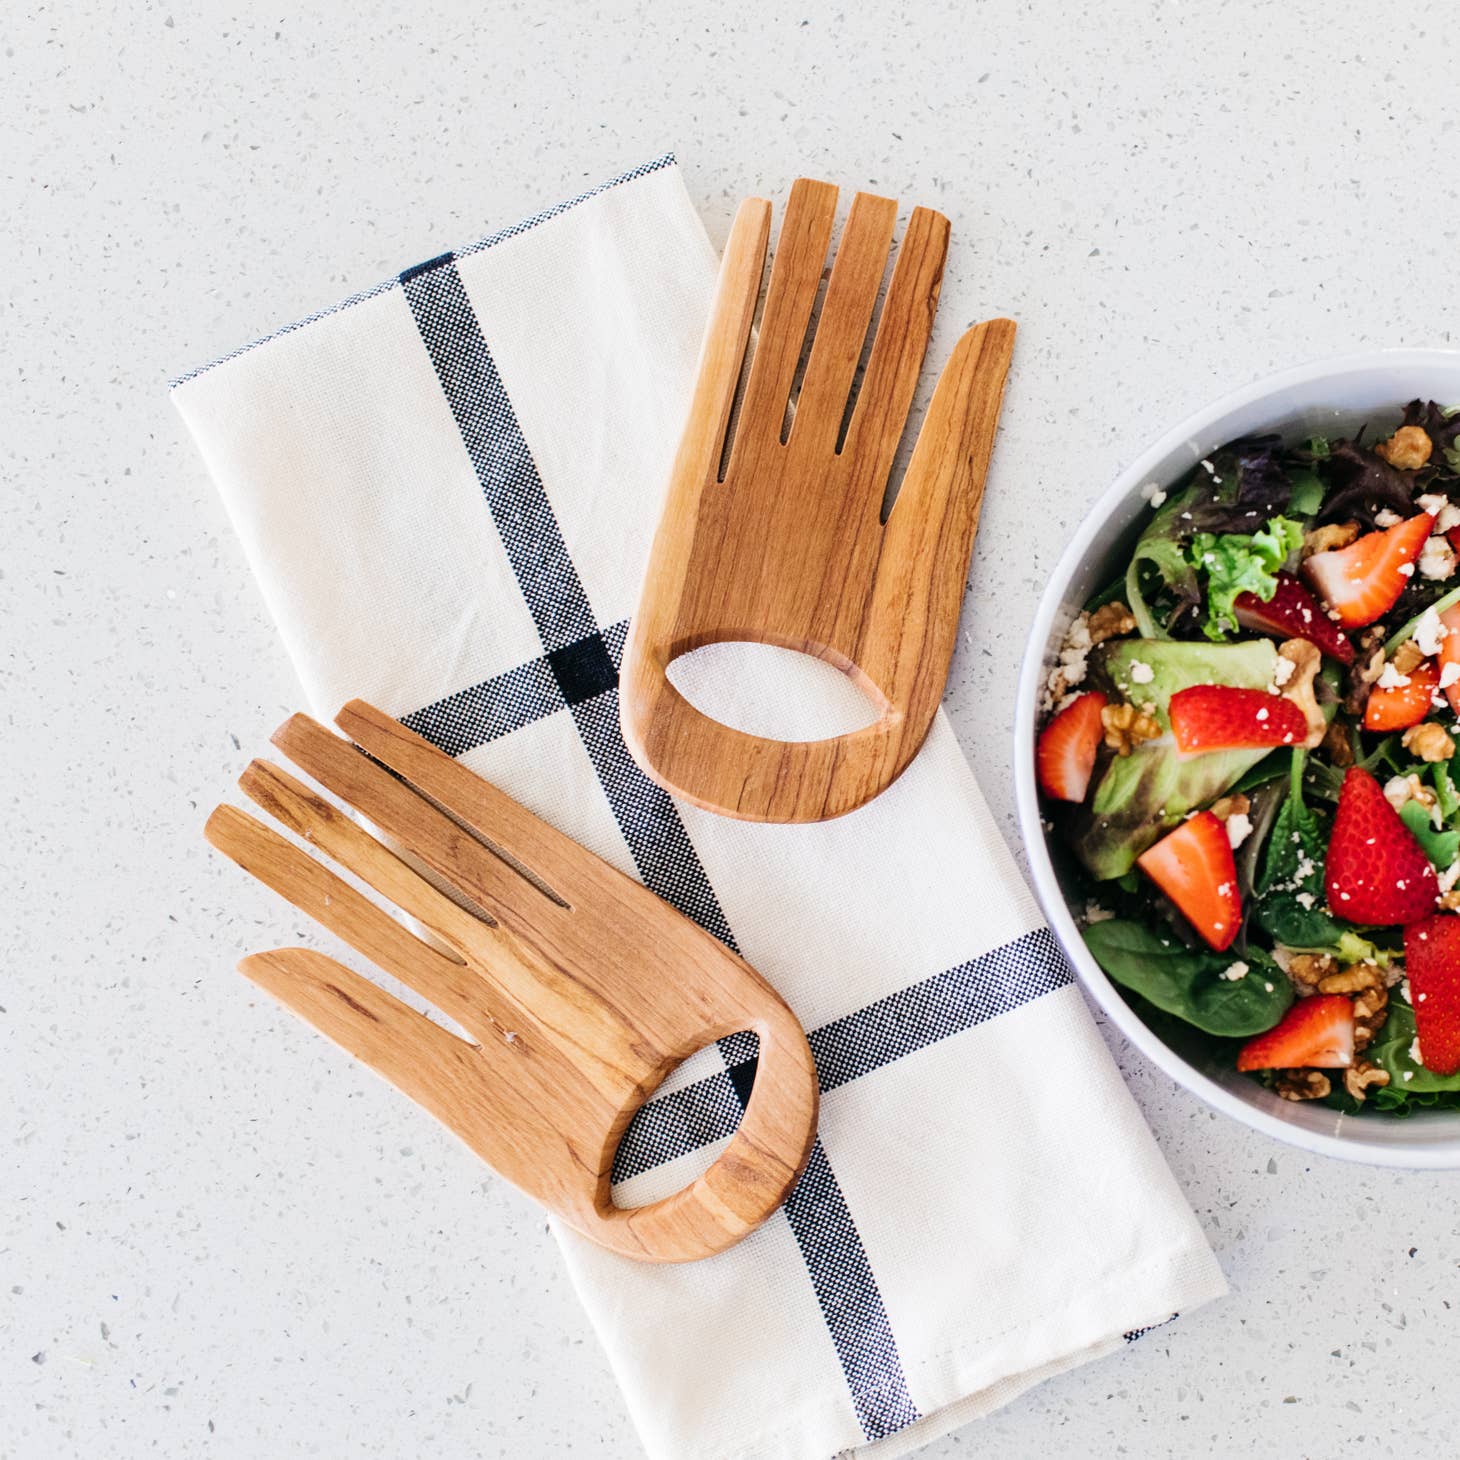 These serving hands are perfect for salads & shaped from durable olive wood. Wild olivewood has a rich grain and is indigenous to East Africa.   Ethically made in Kenya.